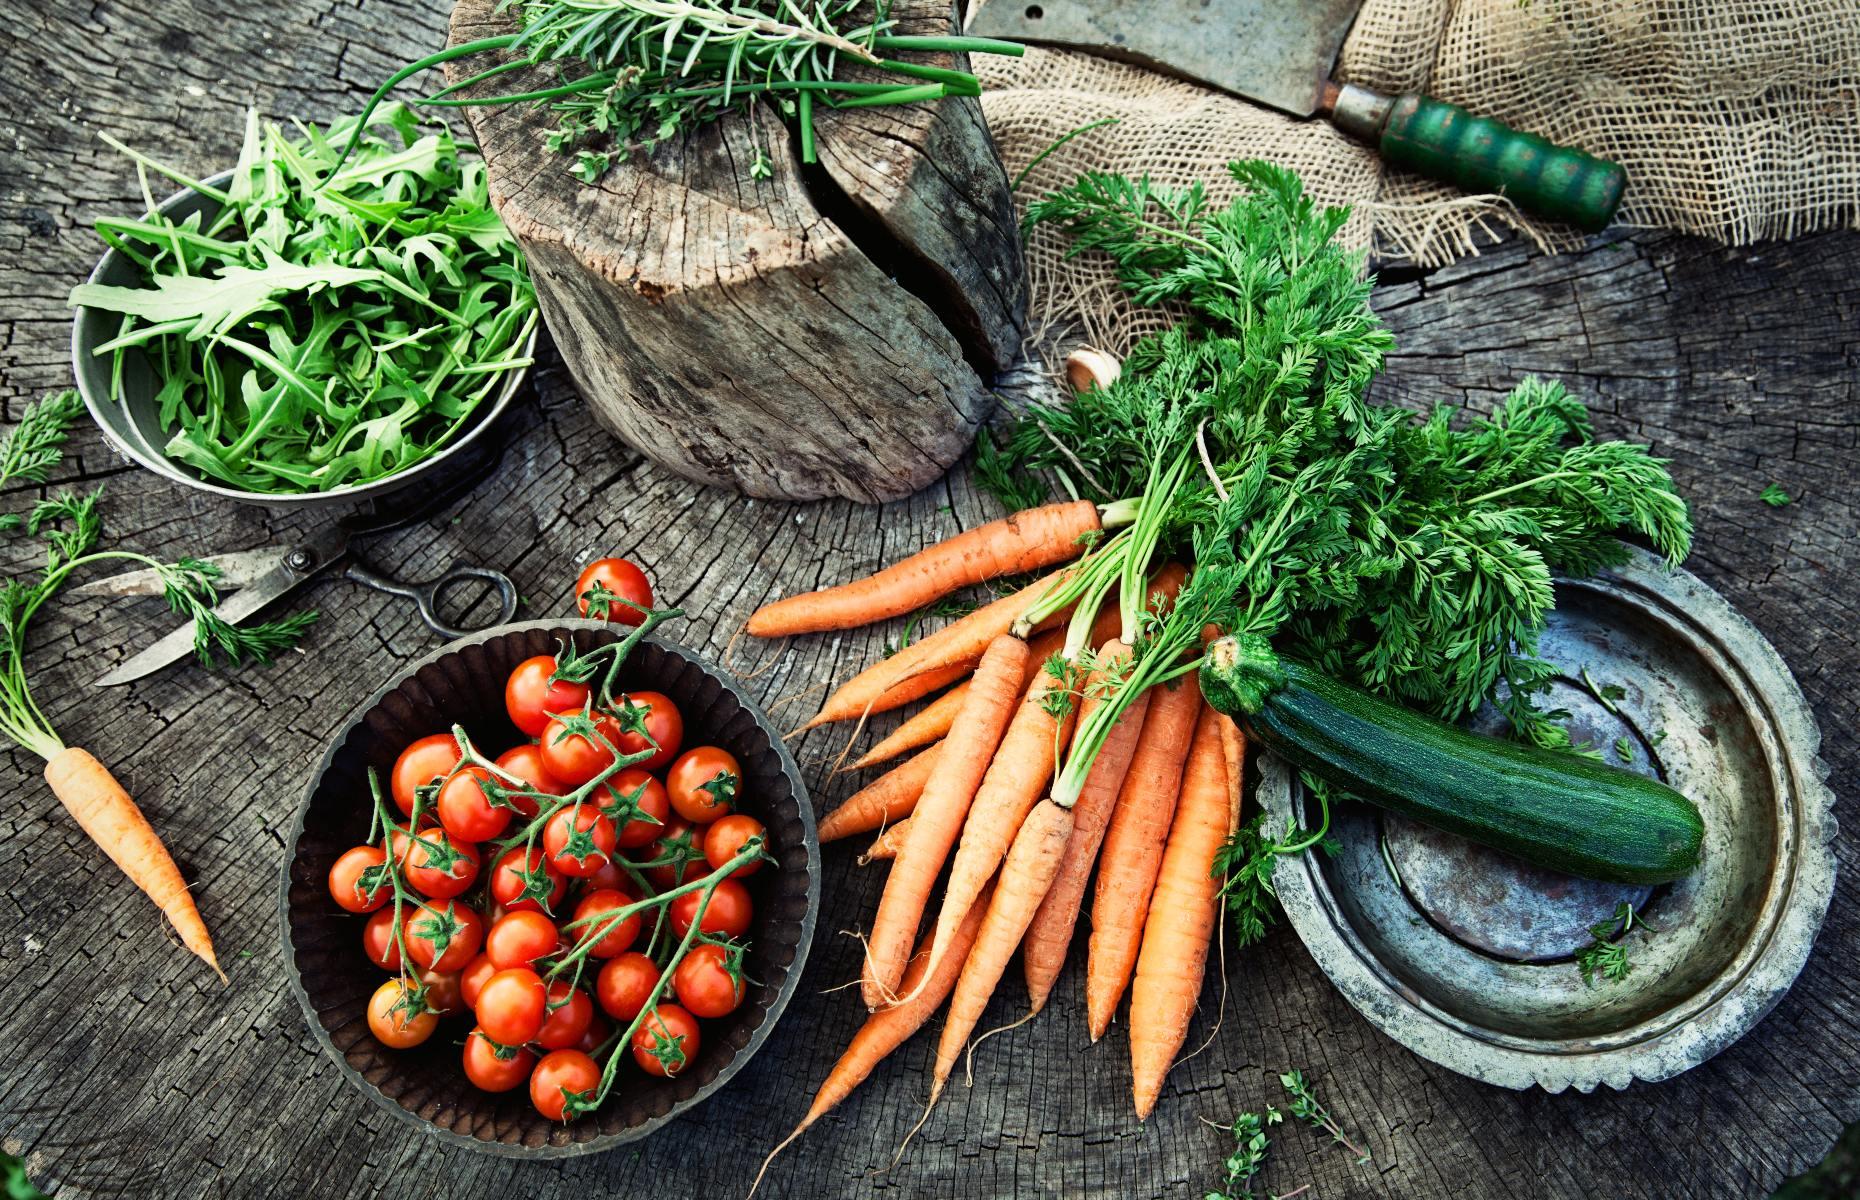 Create your own edible garden with our handy vegetable patch guide